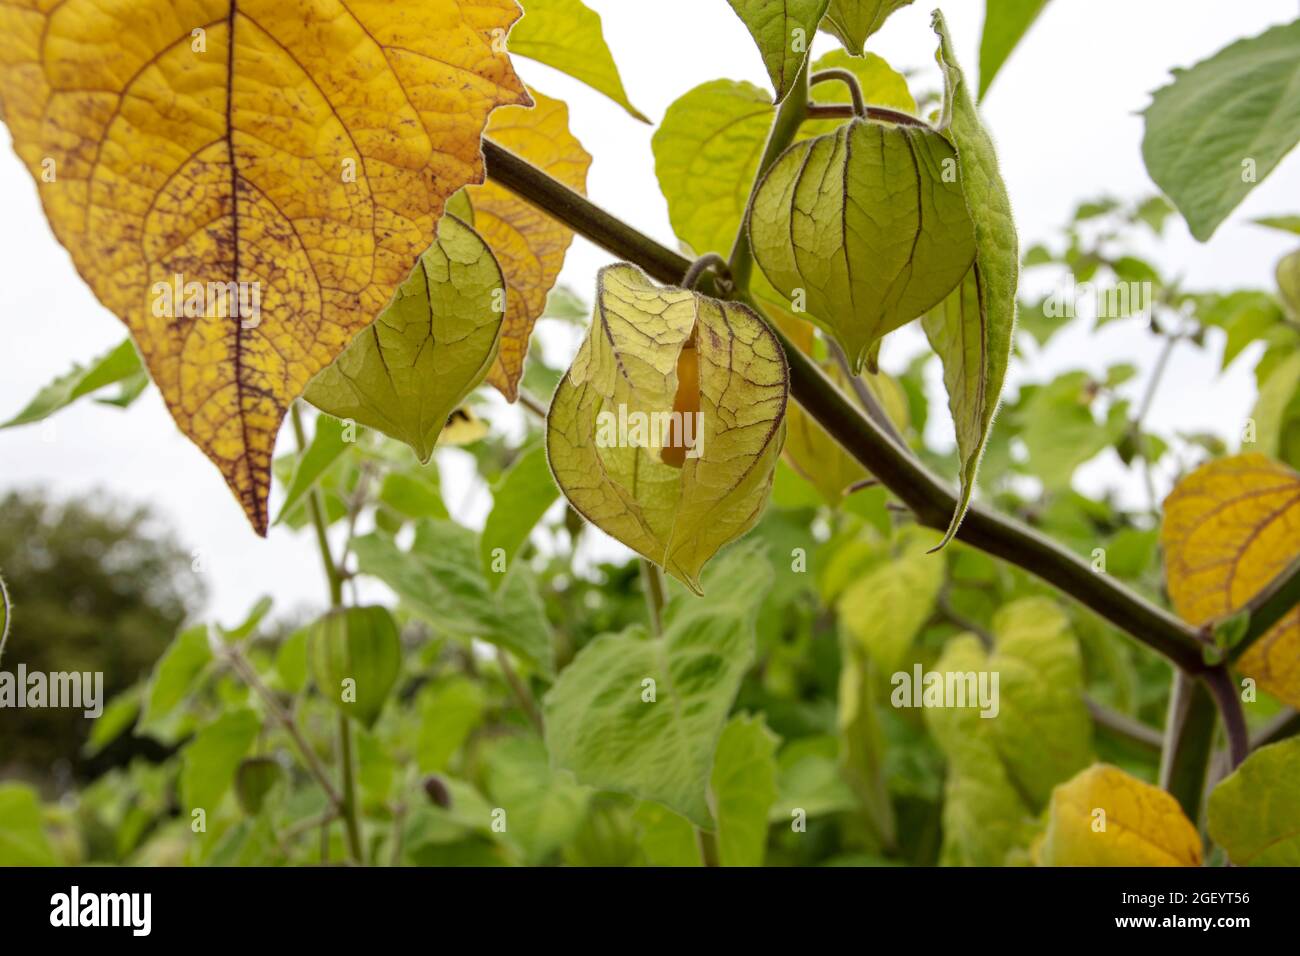 Goldenberry or Cape gooseberry plants with hairy leaves and ripe fruits in yellow calyx. Physalis peruviana. Stock Photo